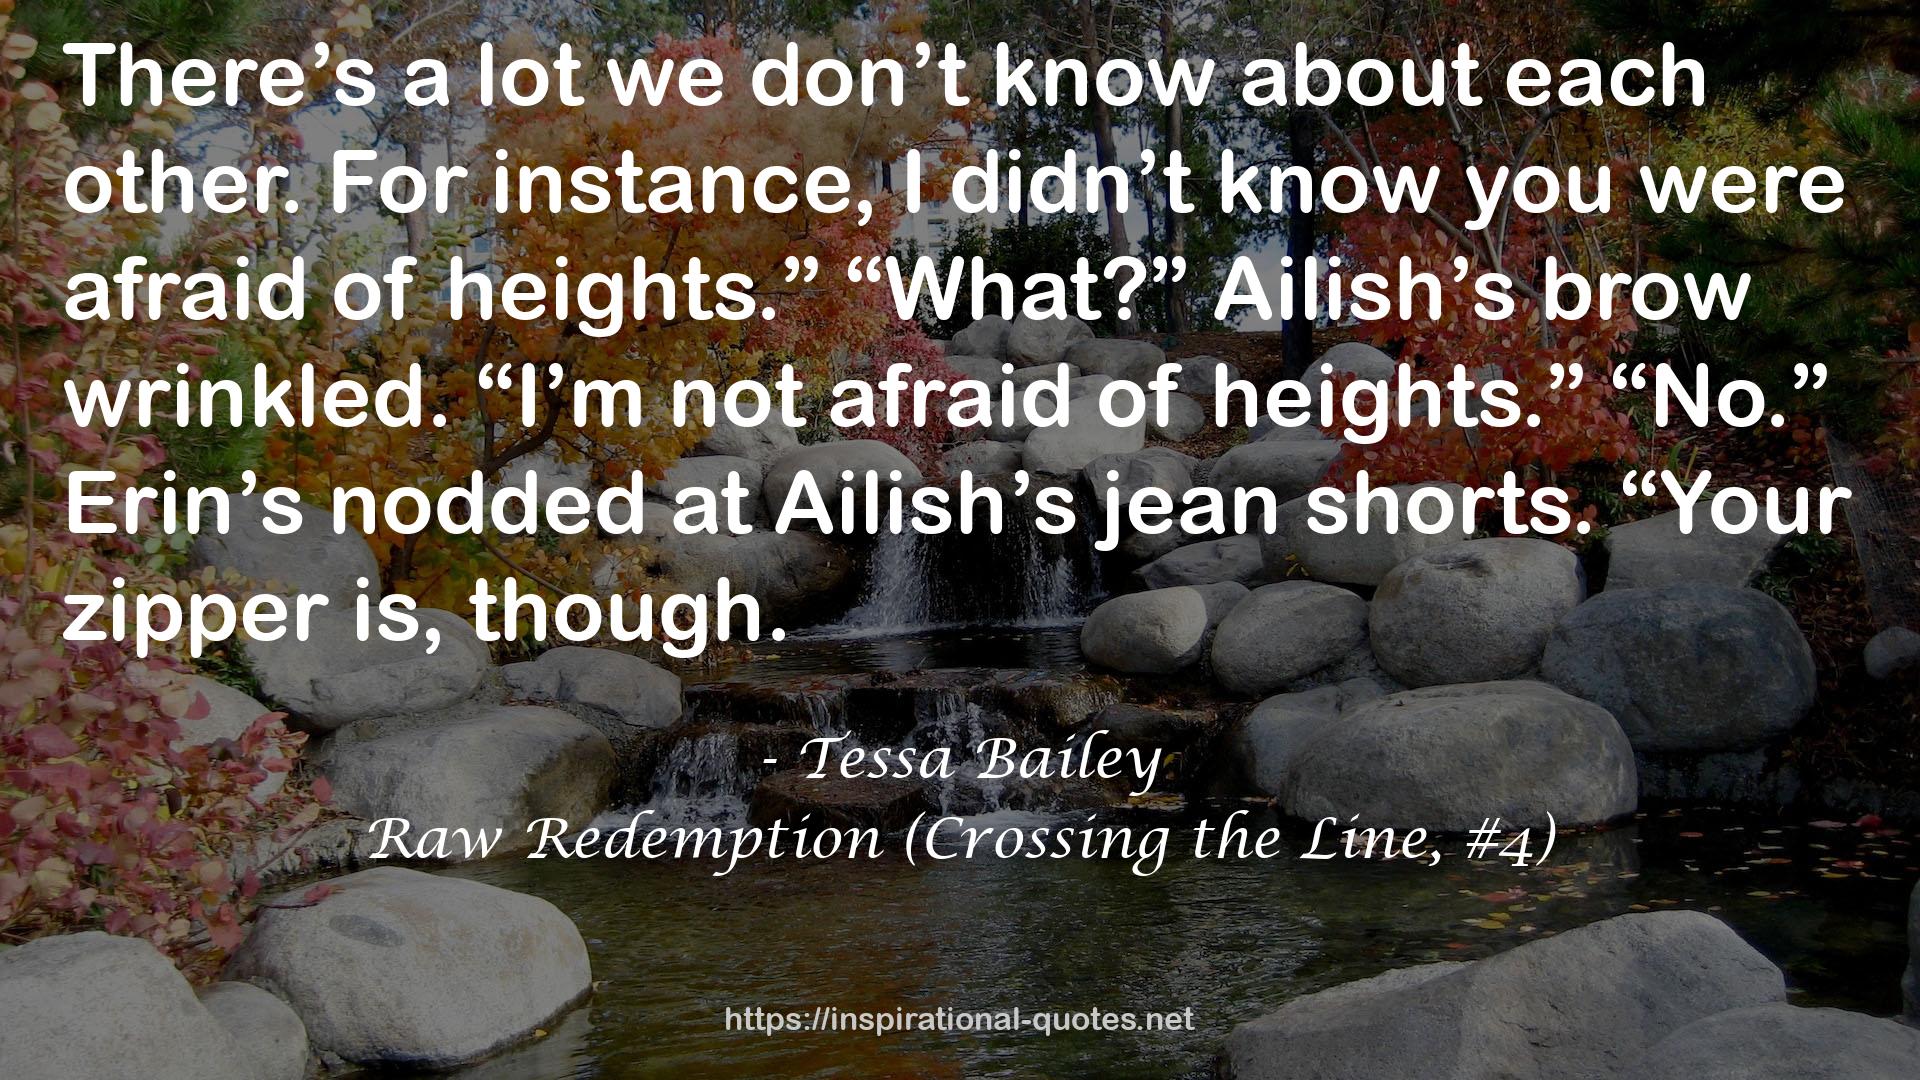 Raw Redemption (Crossing the Line, #4) QUOTES